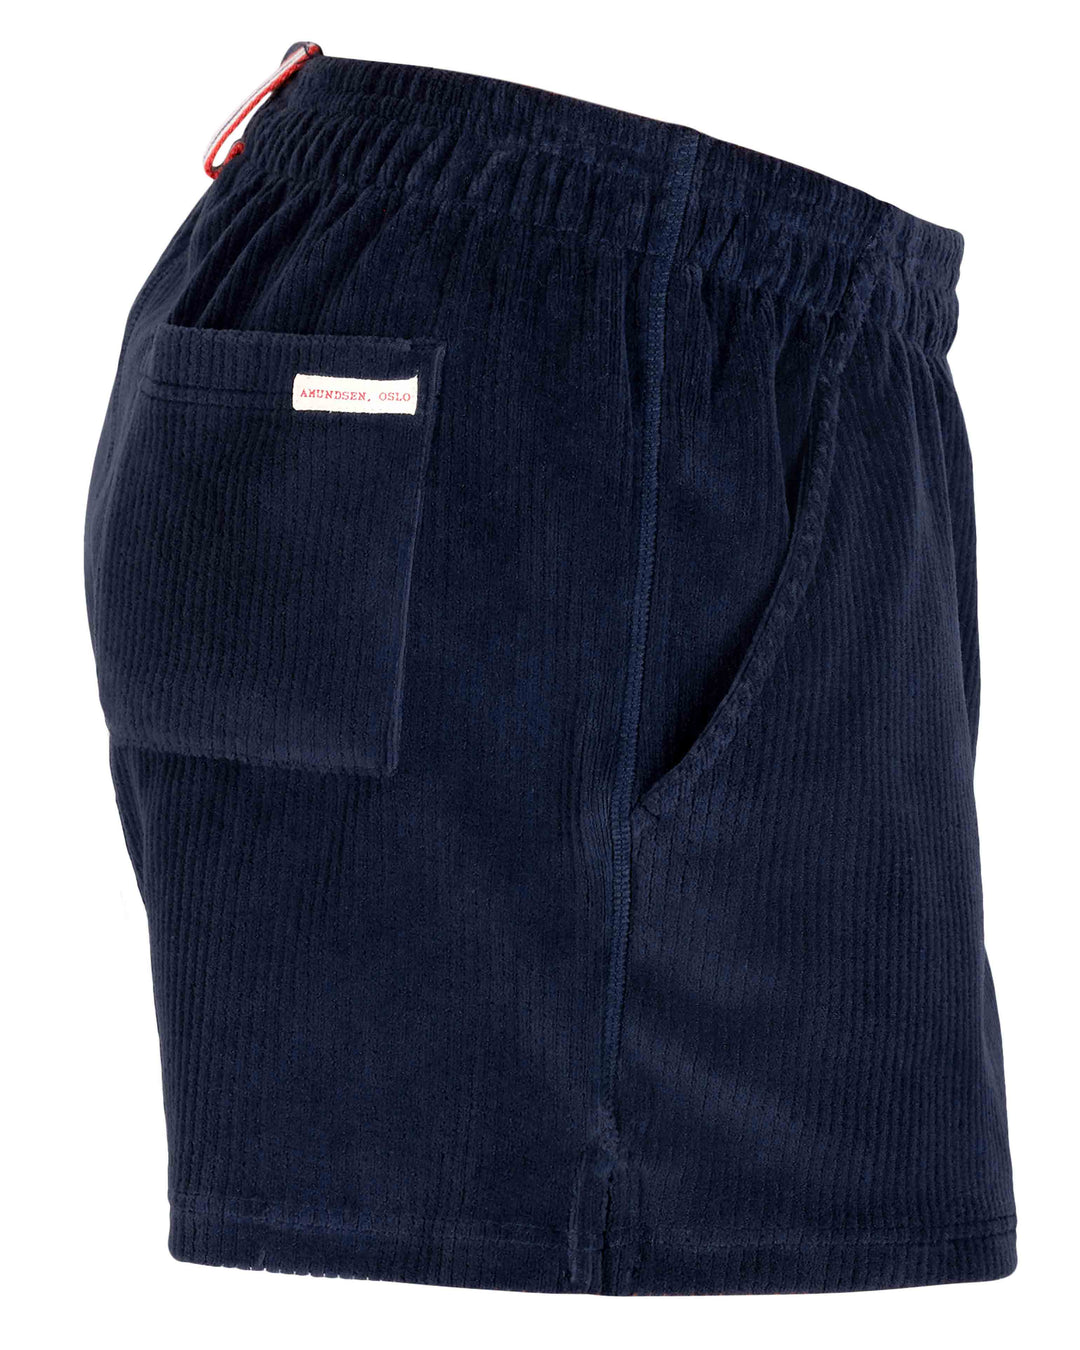 Amundsen Sports 4INCHER COMFY CORD SHORTS WOMENS Faded Navy